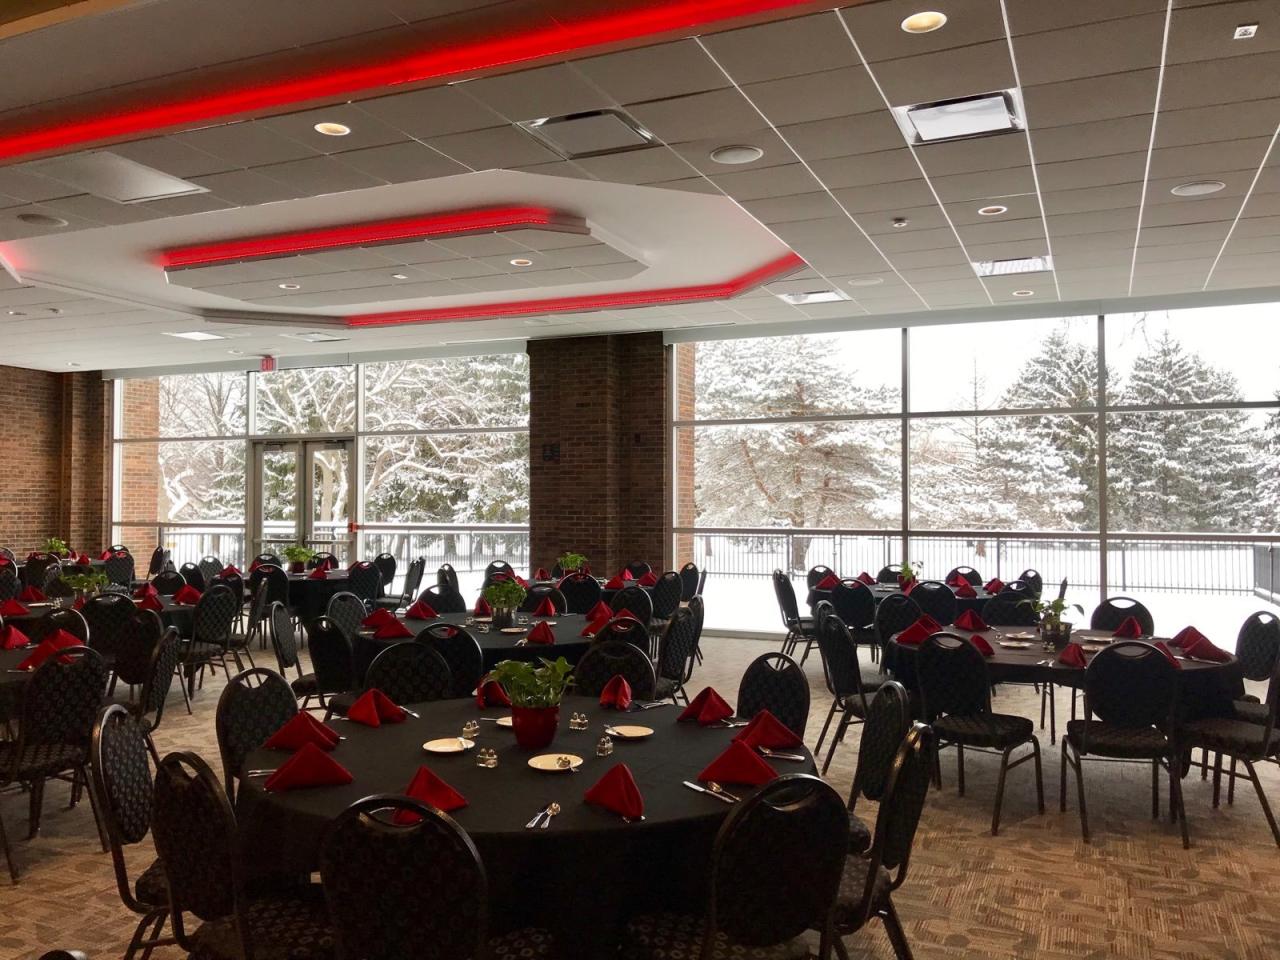 Fawcett center room decorated for an event in winter